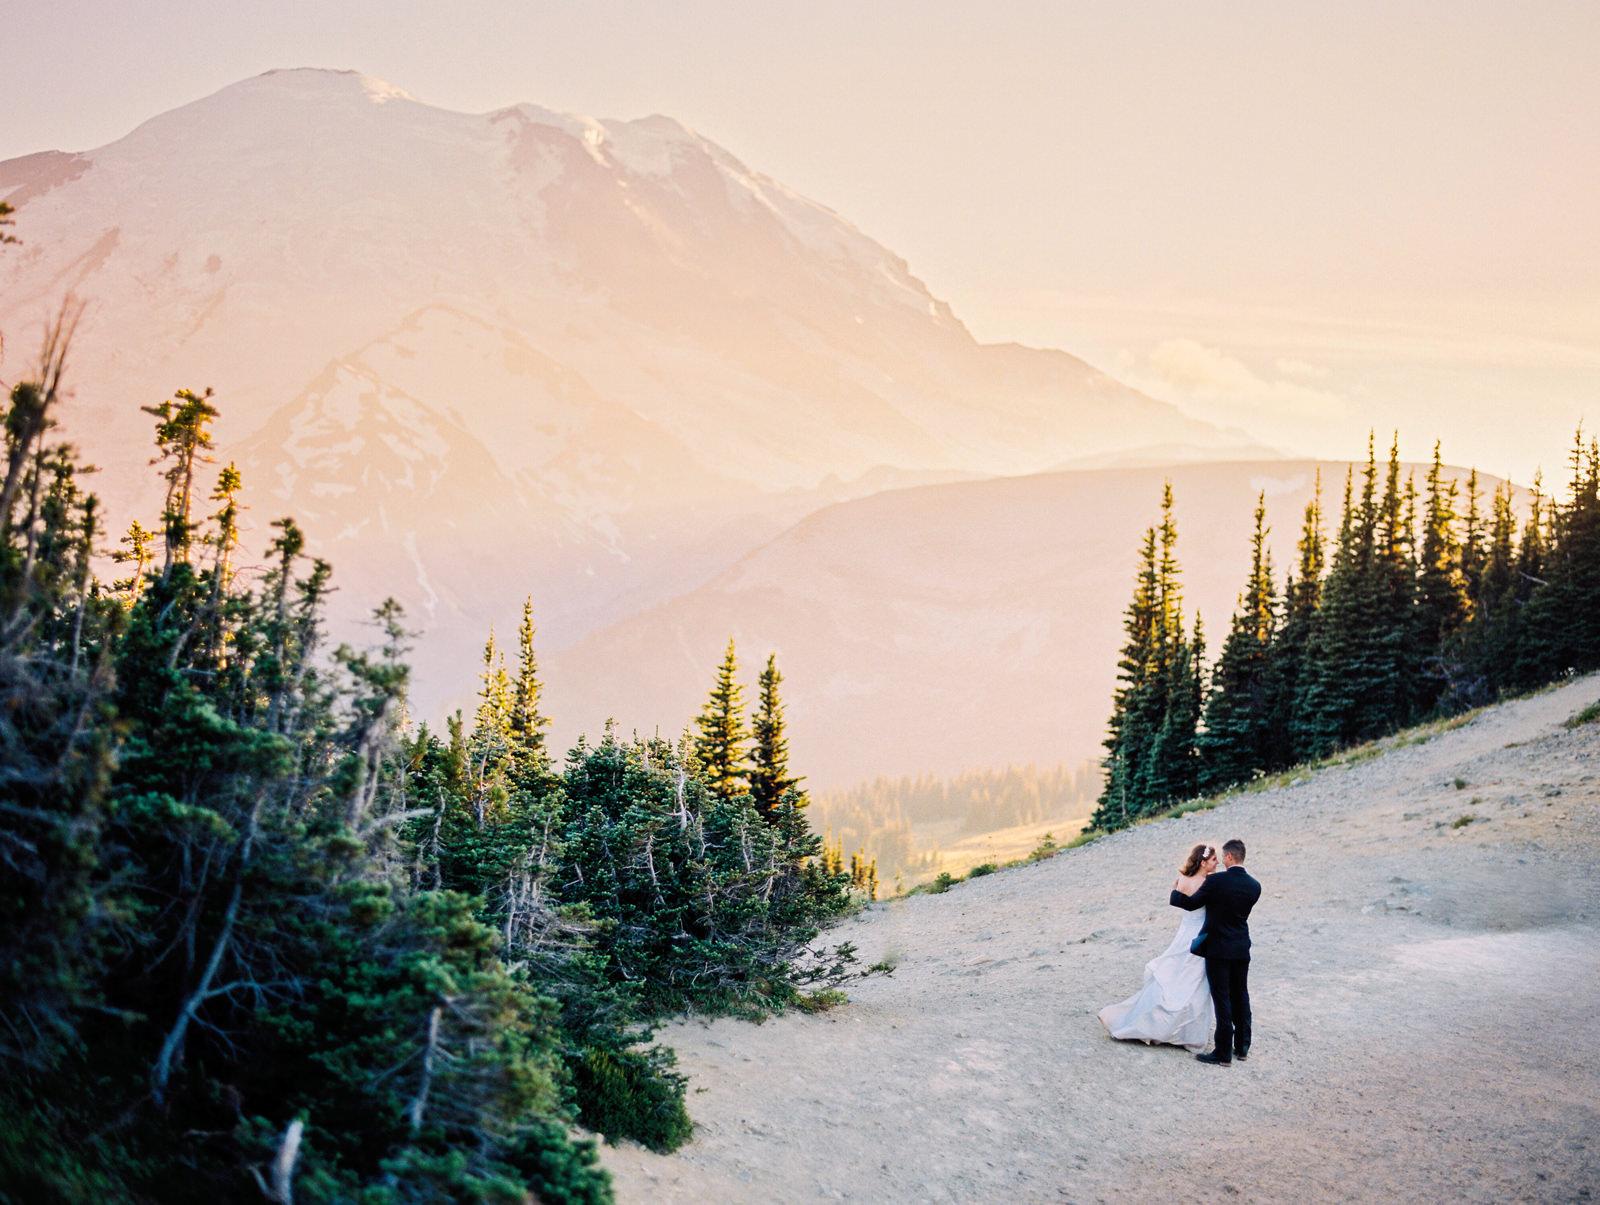 026-elopement-photo-at-mt-rainier-with-amazing-sunset-by-film-photographer-ryan-flynn-photography.jpg